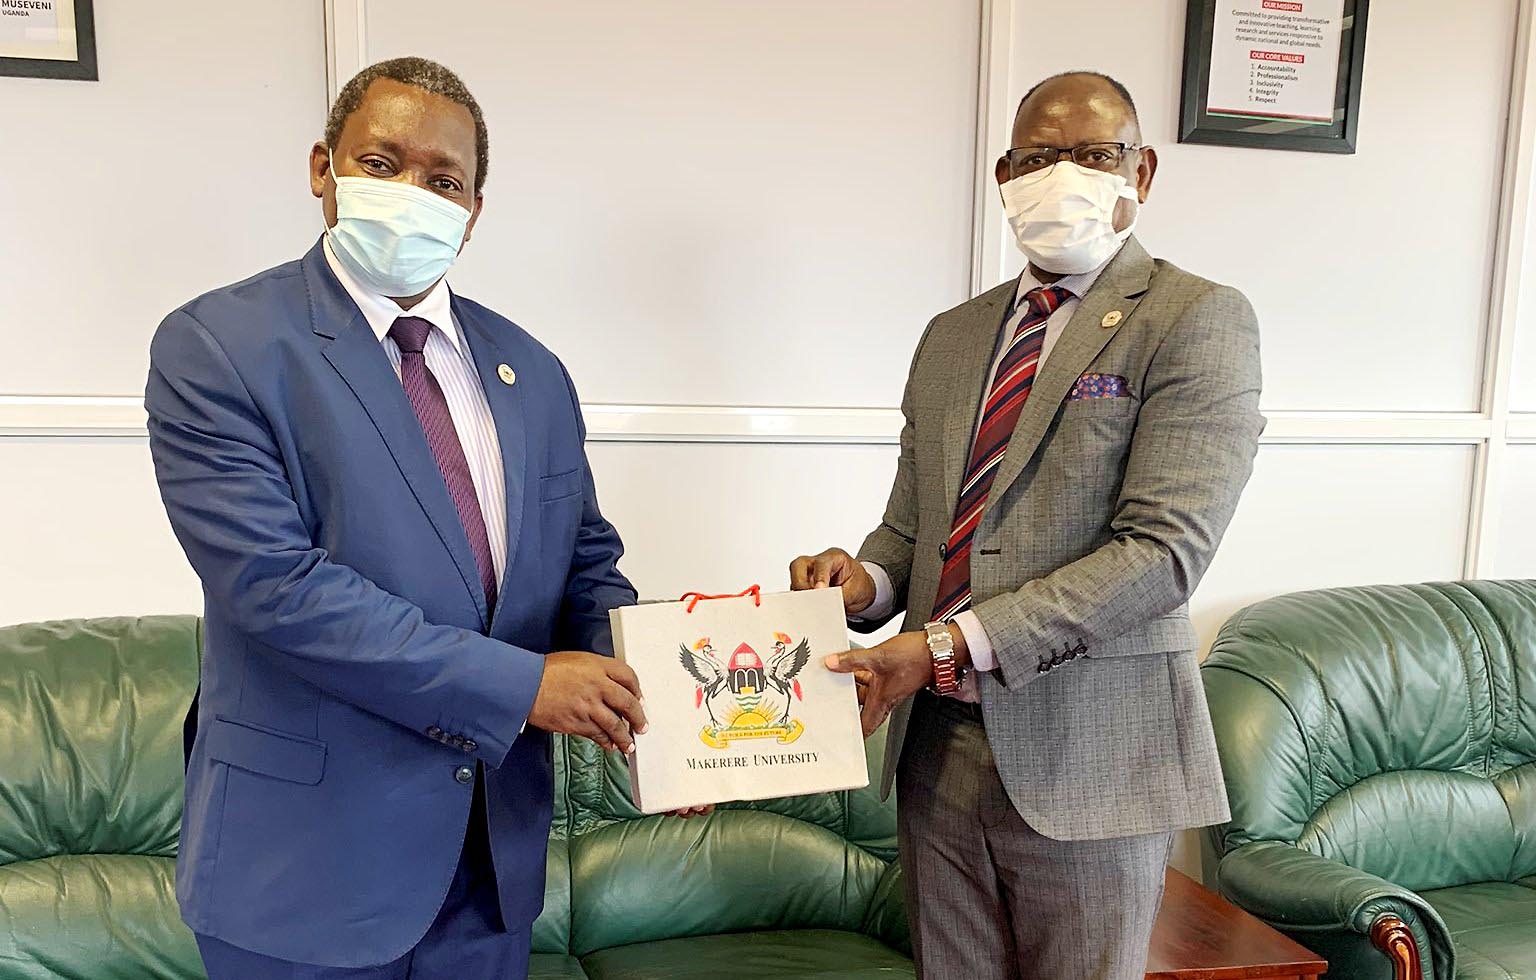 The Vice Chancellor, Prof. Barnabas Nawangwe (R) hands over an assortment of Mak souvenirs to ES IUCEA, Prof. Gaspard Banyakimbona (L) after their meeting on 24th August 2021, CTF1, Makerere University.